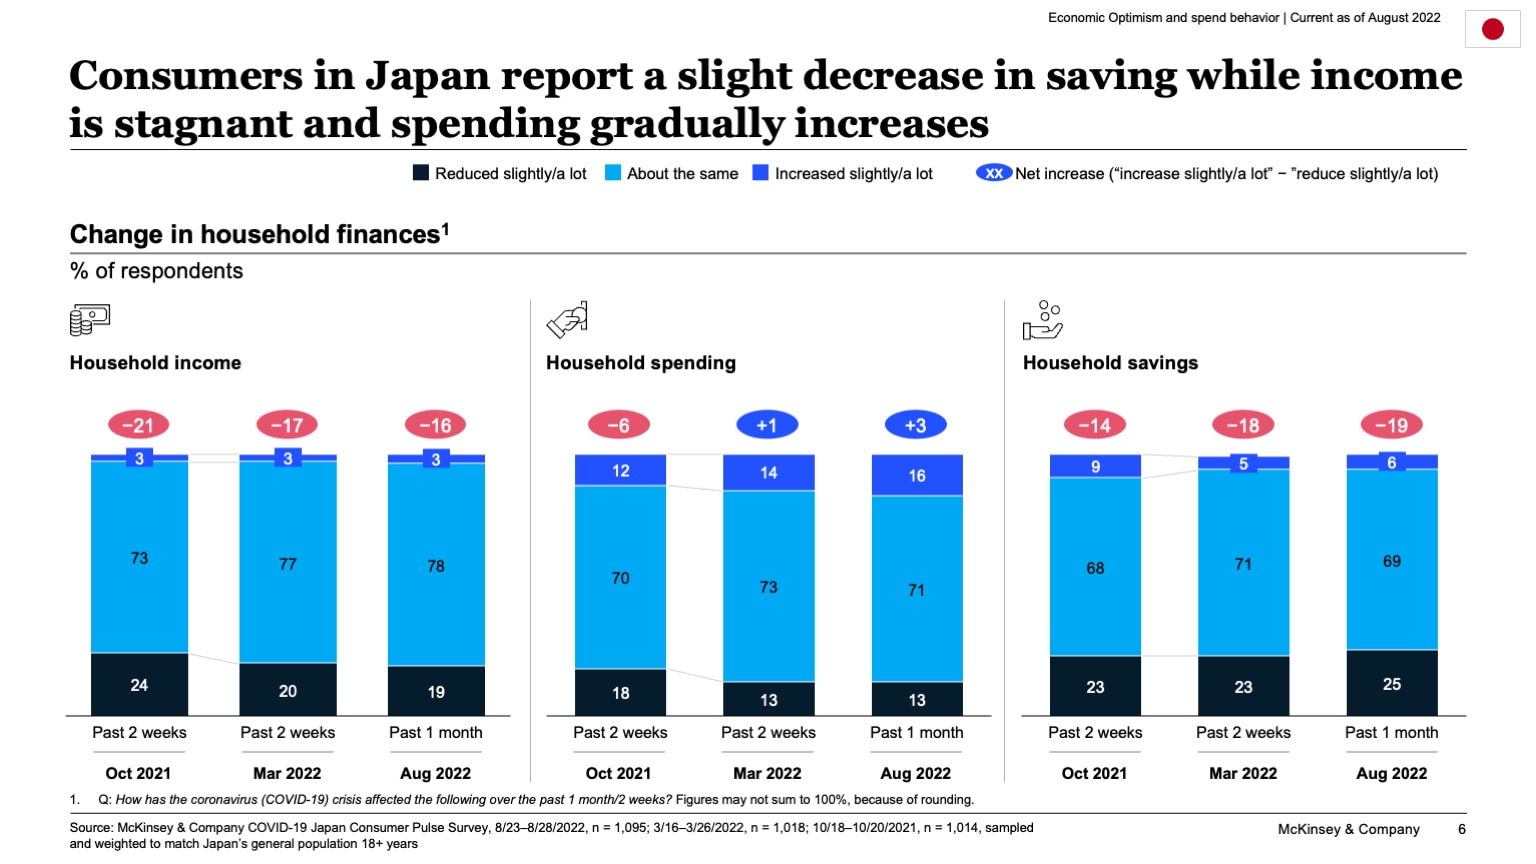 Consumers in Japan report a slight decrease in saving while income is stagnant and spending gradually increases